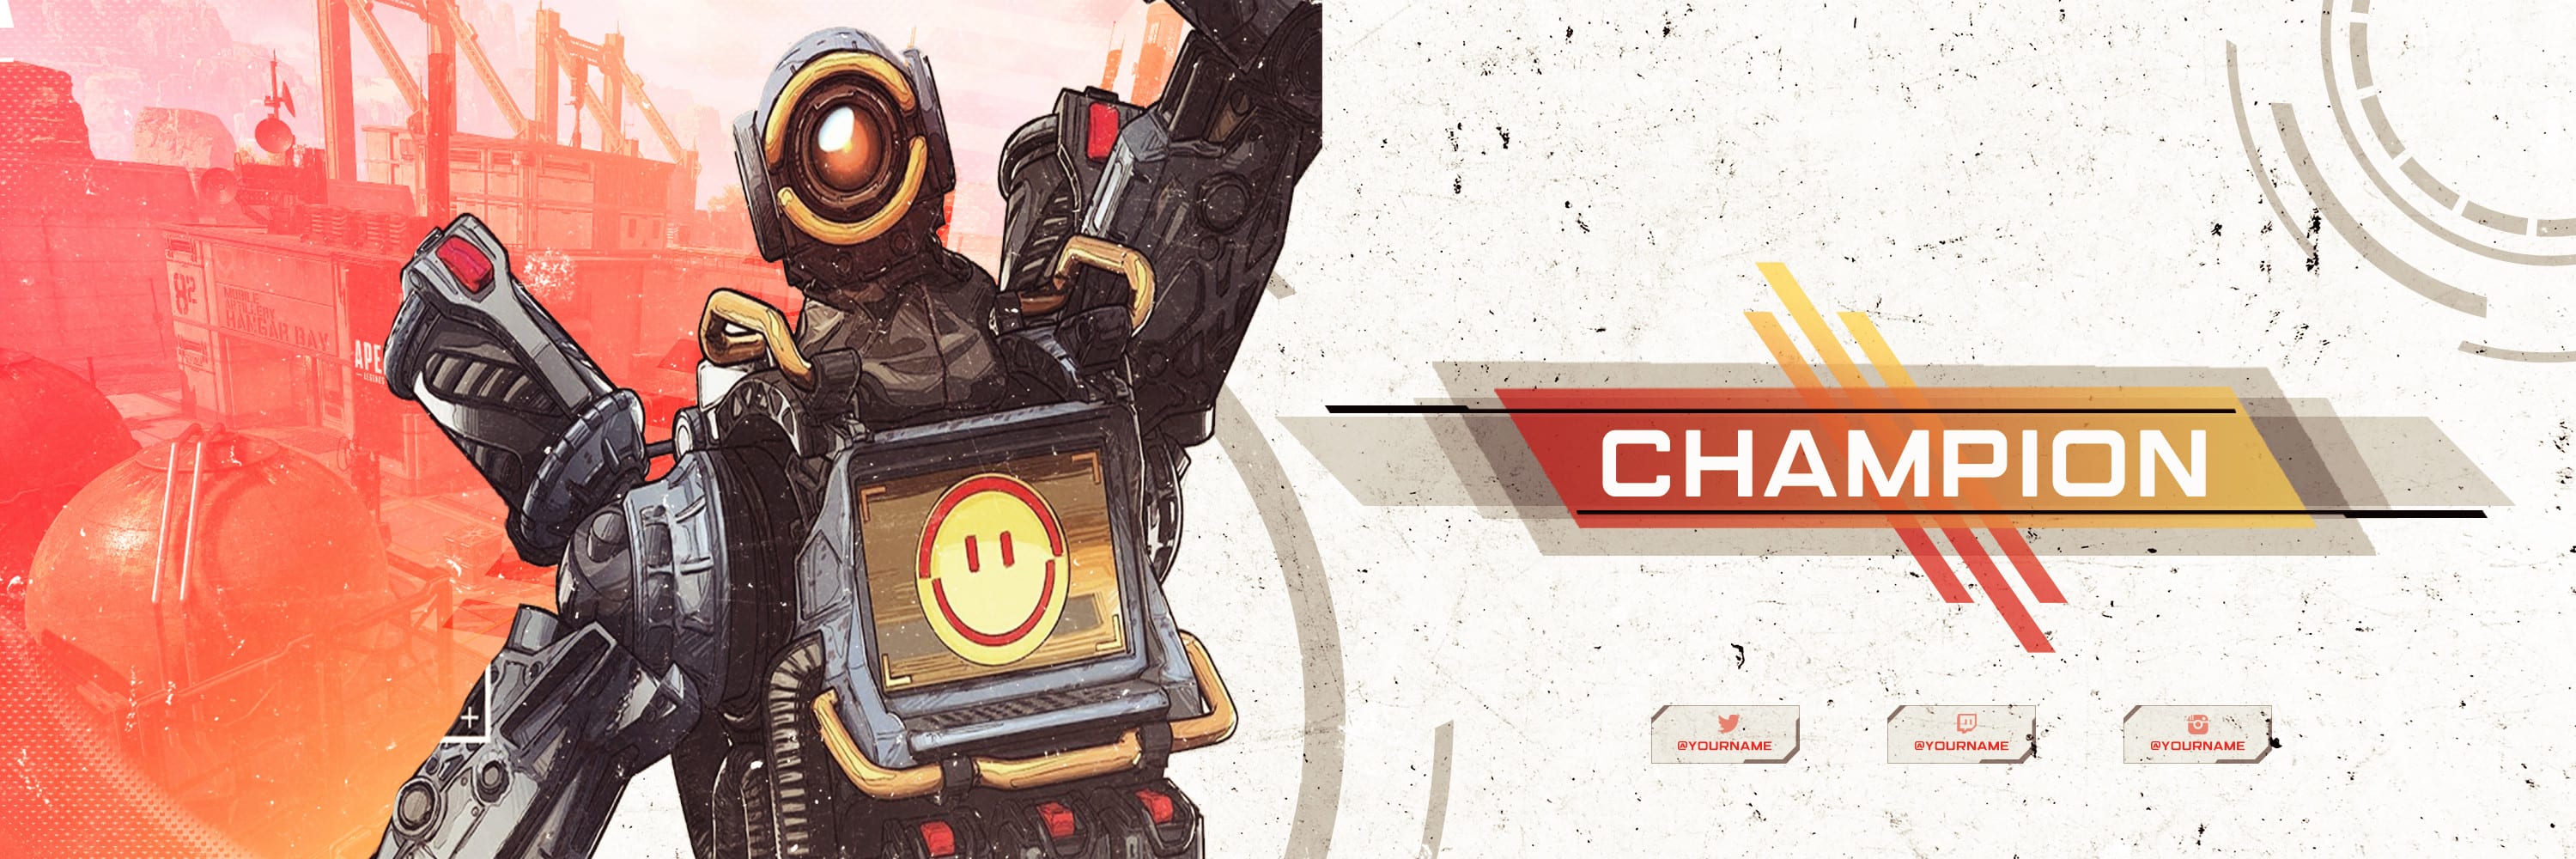 Make An Amazing Apex Legends Theme Banner By Jordking